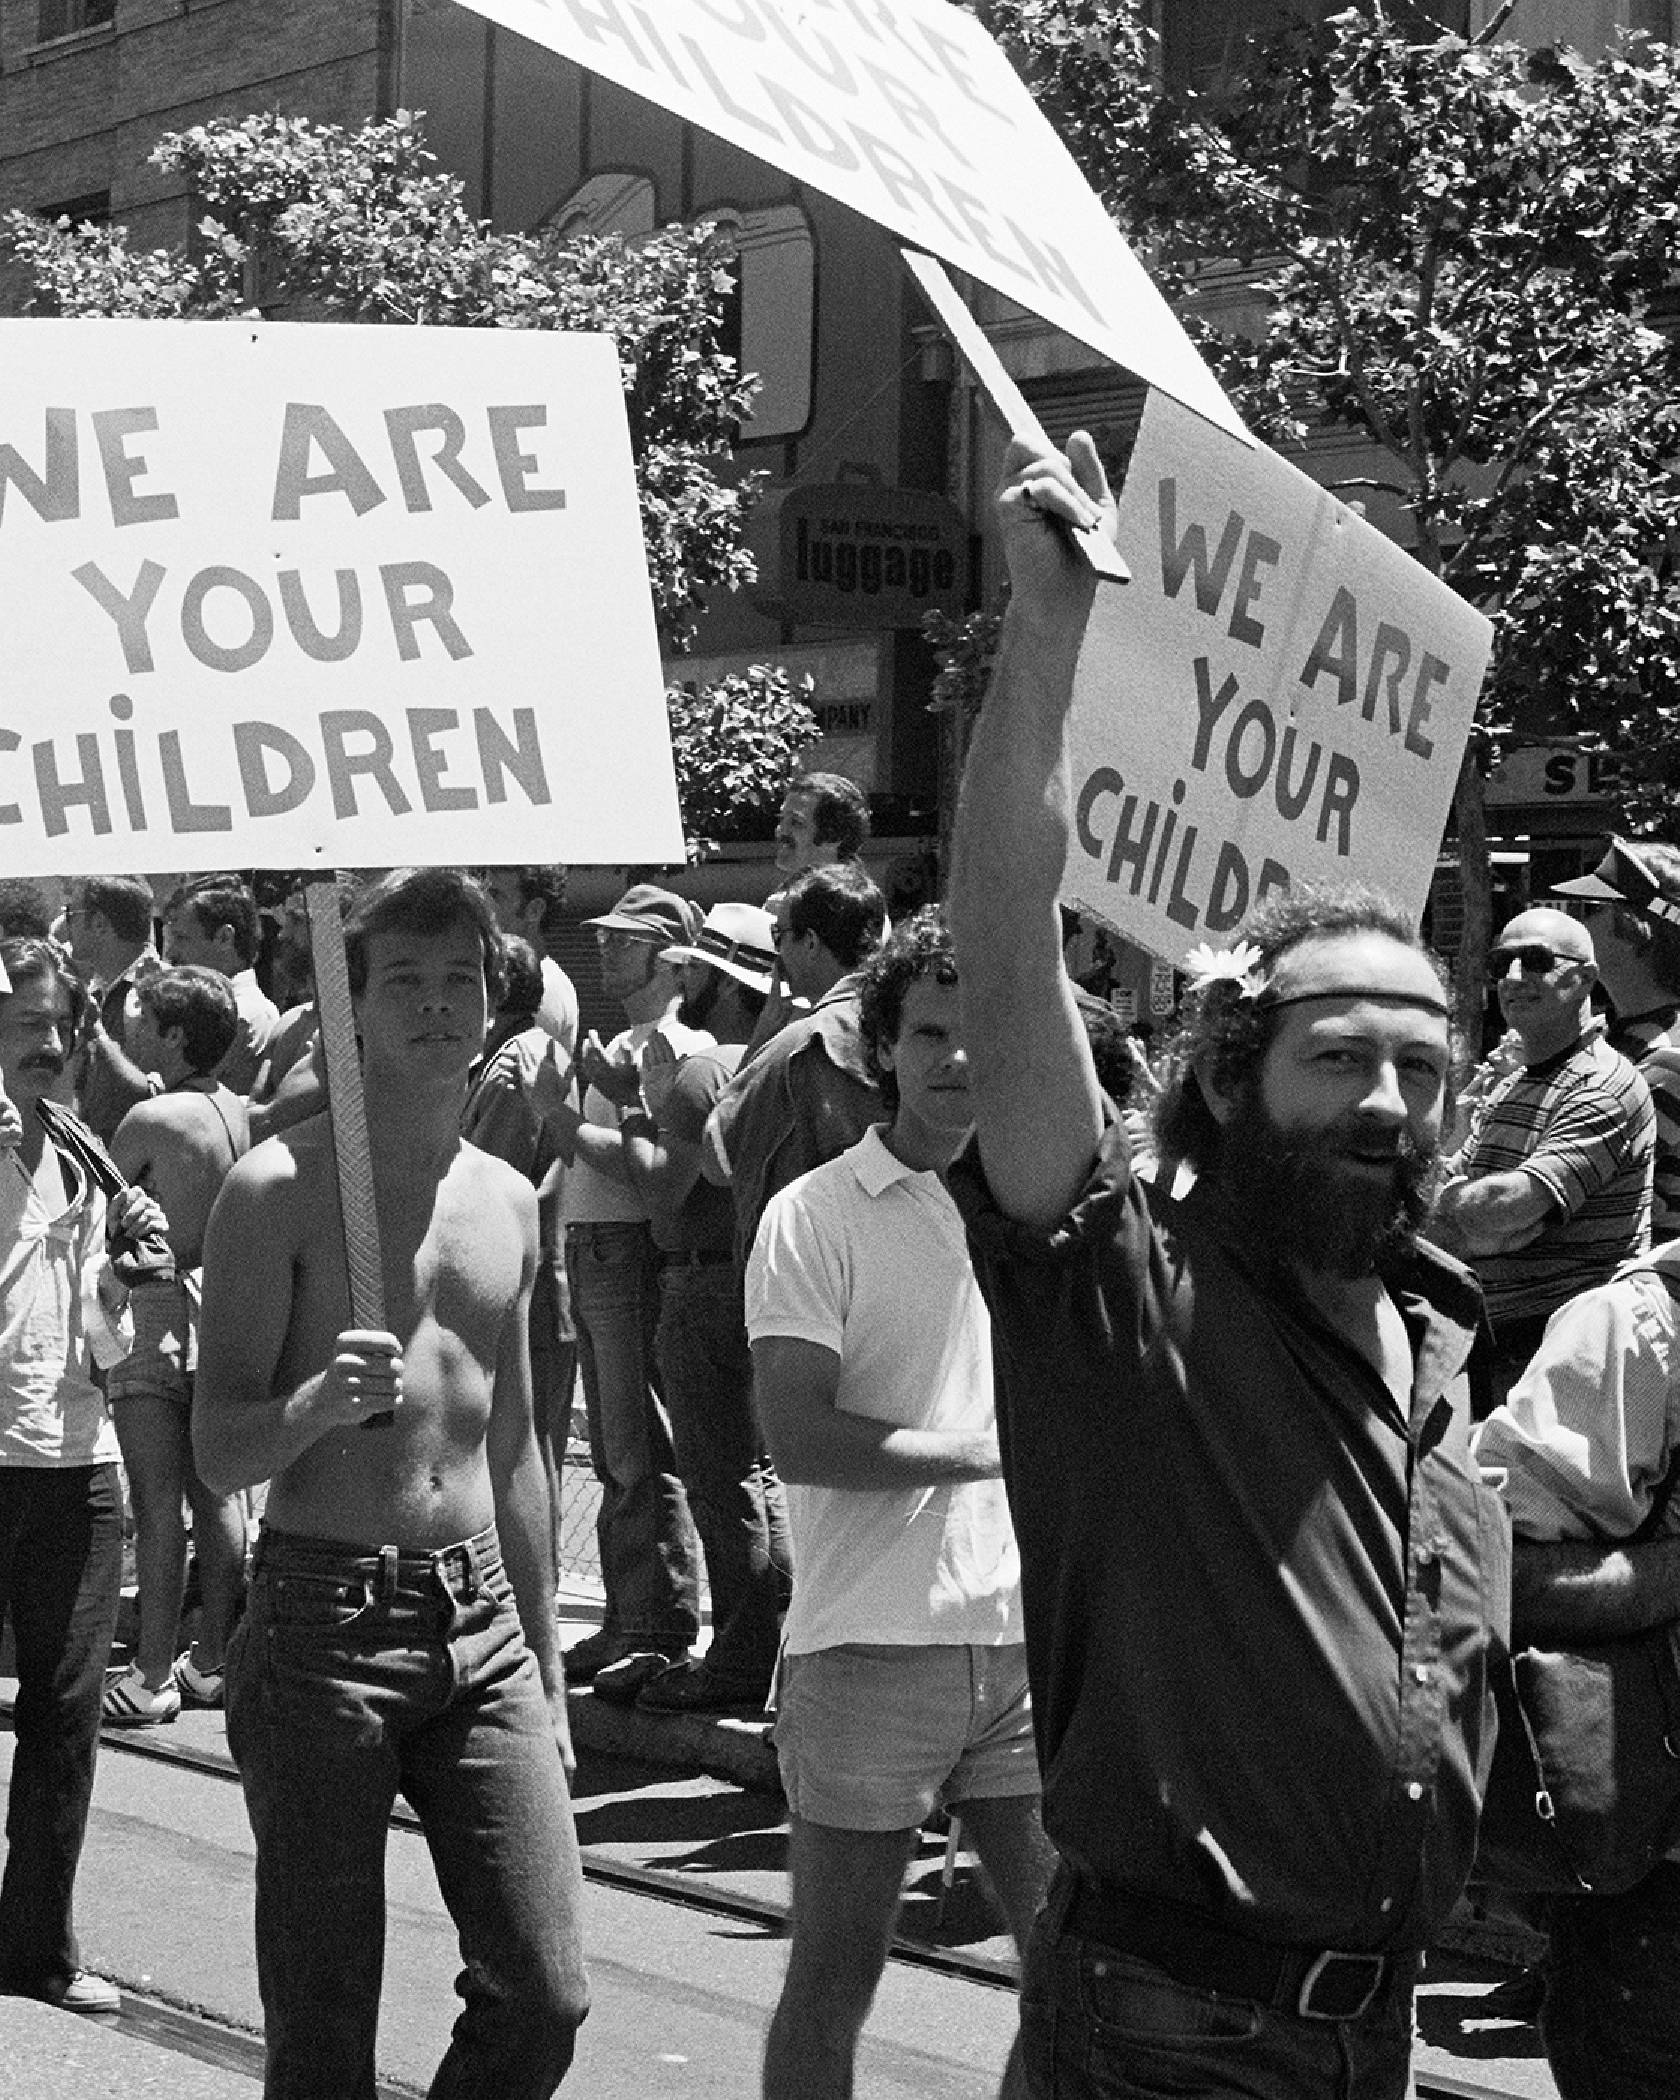 A black and white photo of people protesting